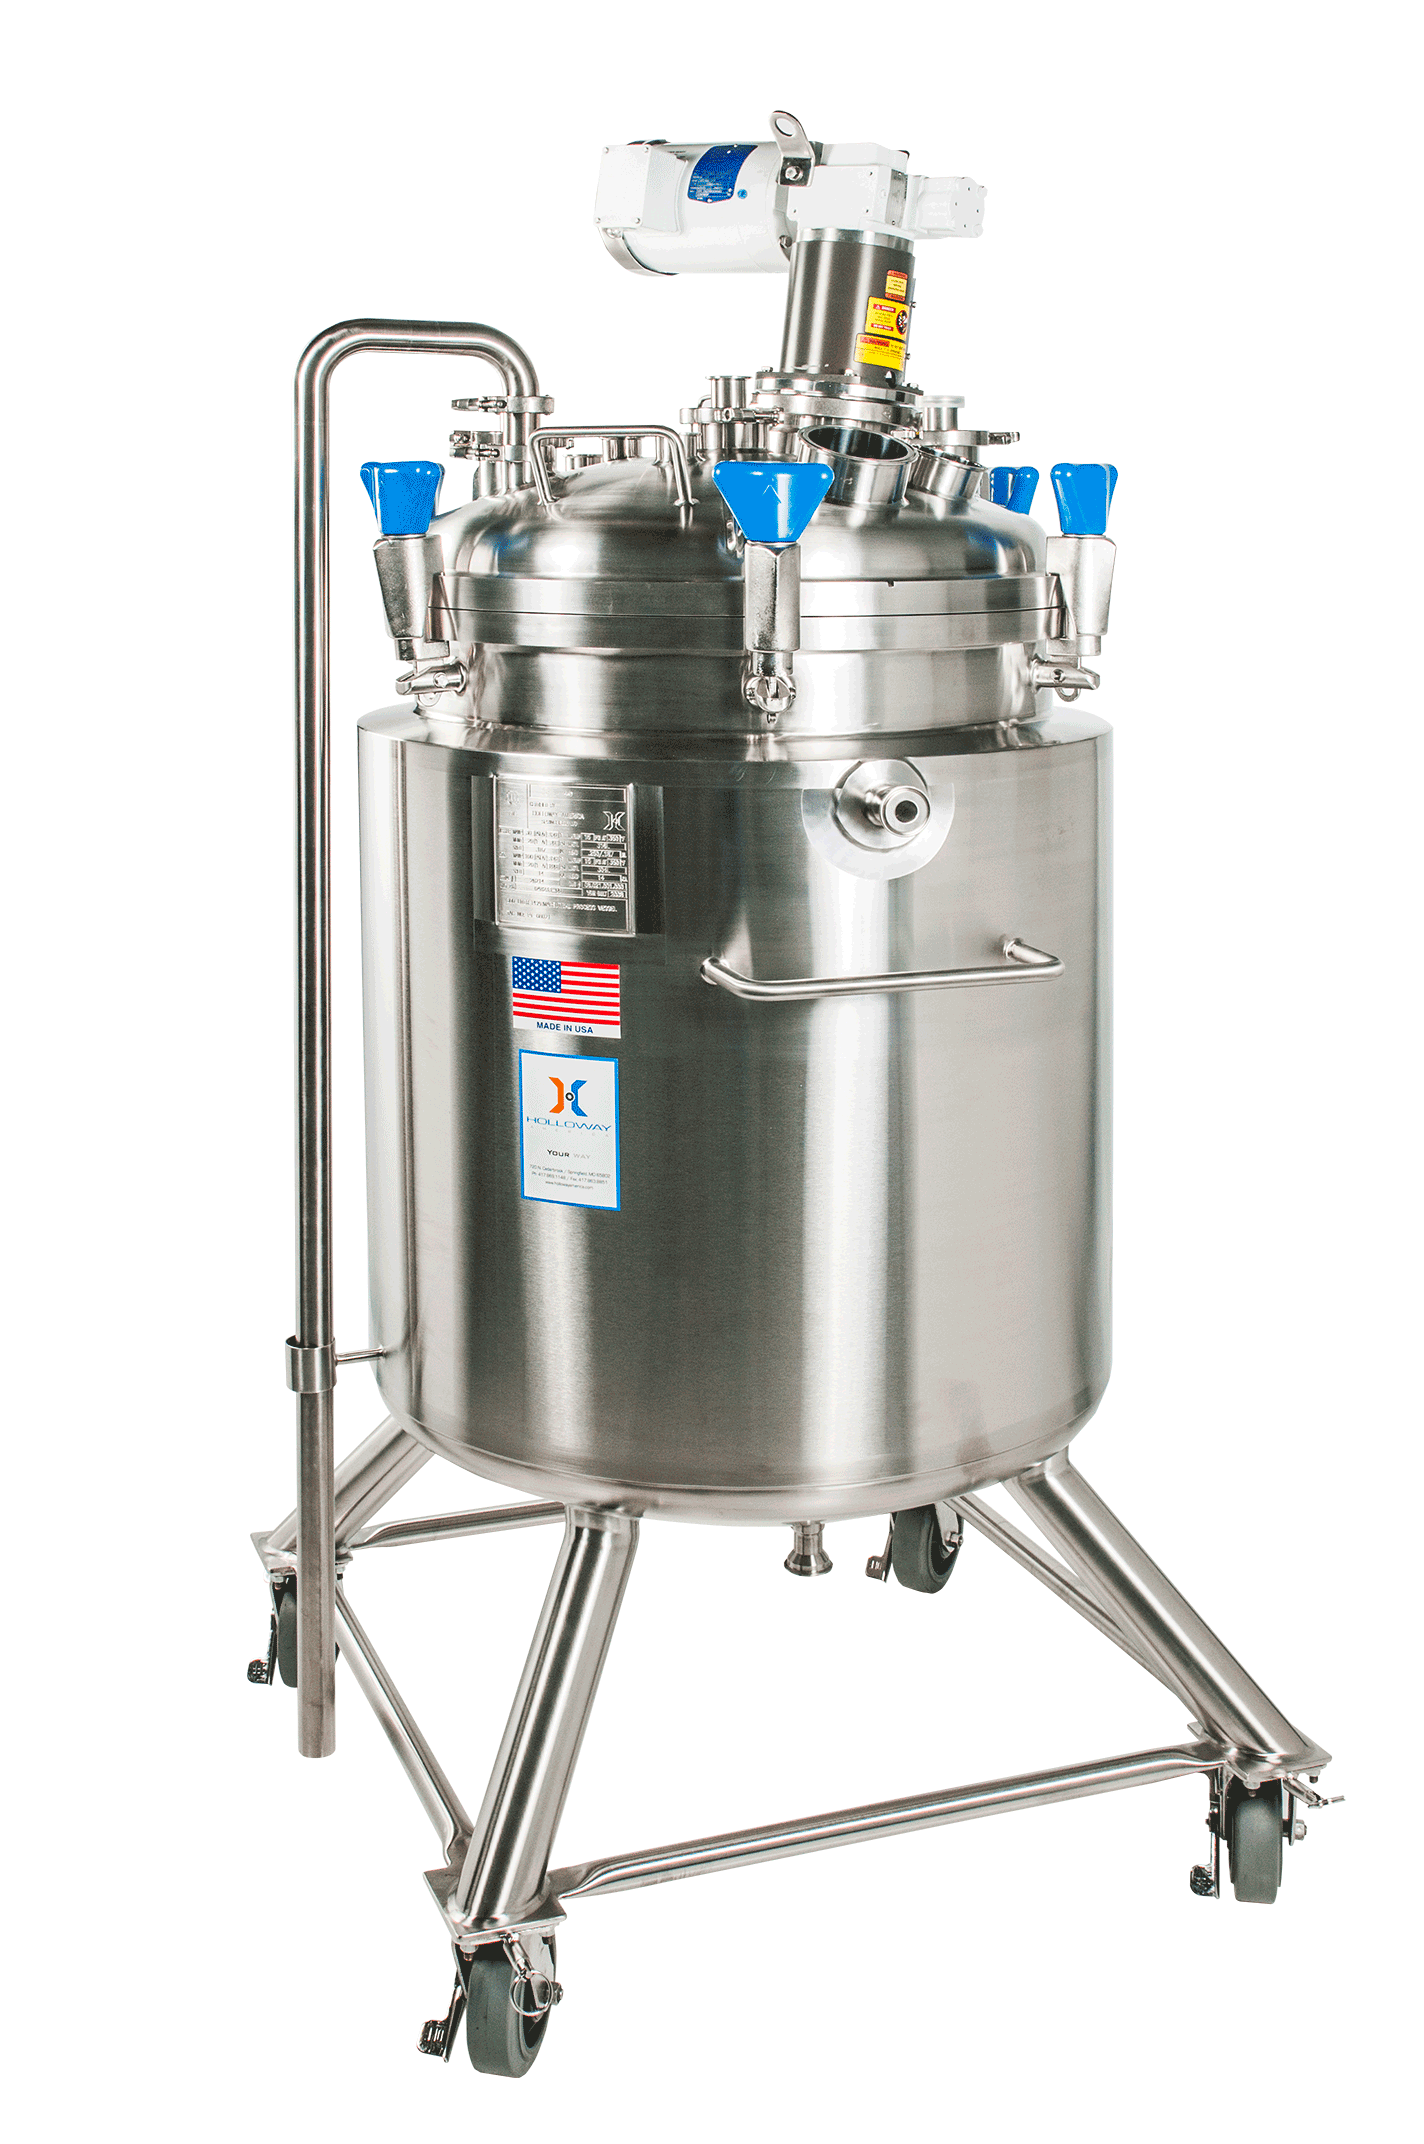 A mix tank with wheels, like this, is a portable mixing tank or vessel.